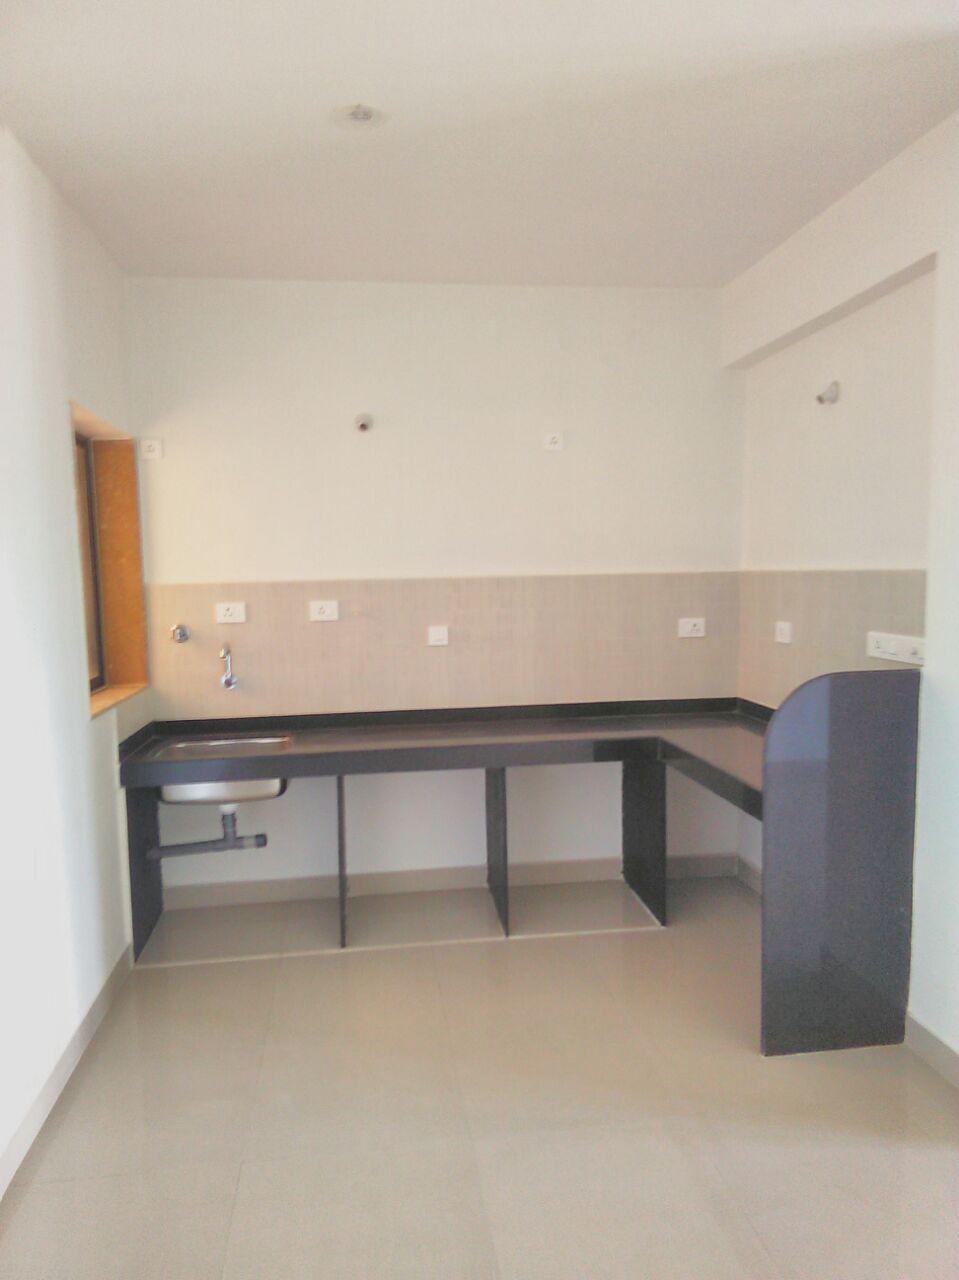 1 BHK 1 Bath Residential Apartment for Sale